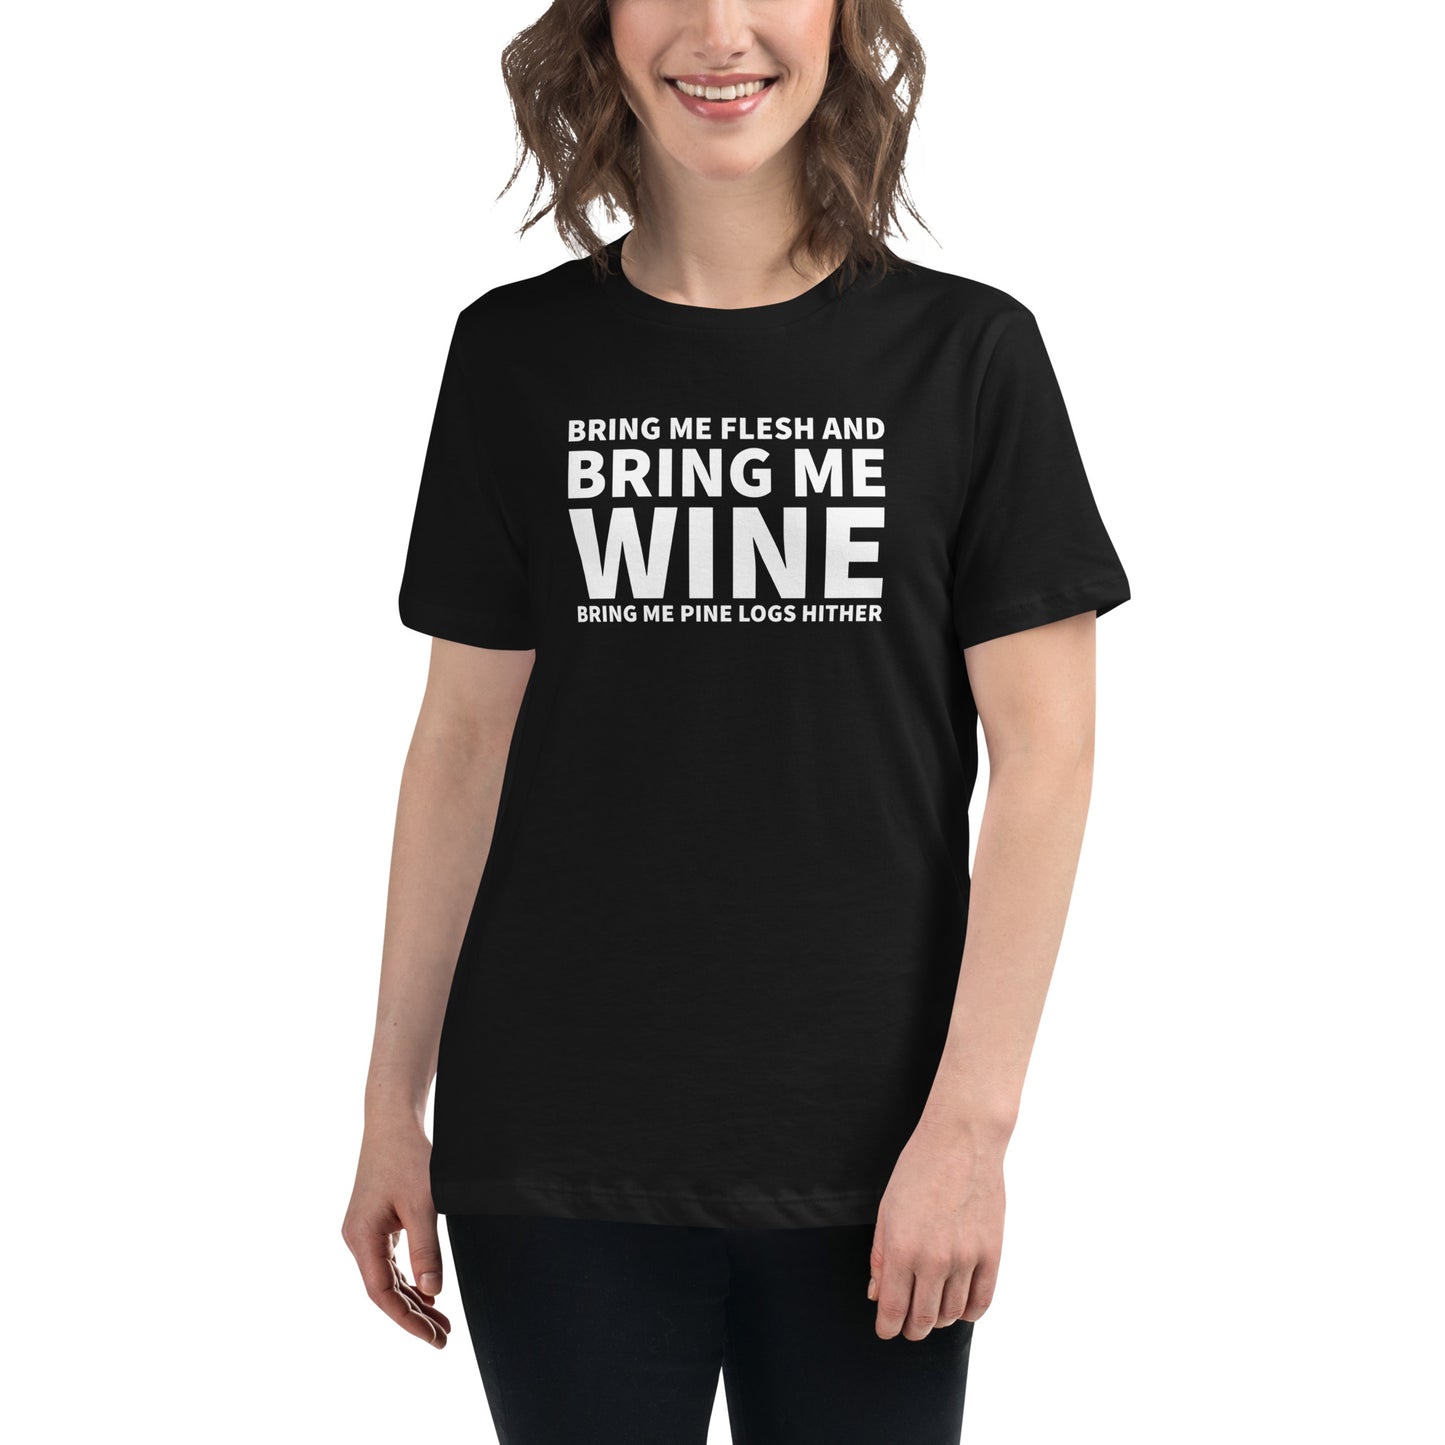 Bring me wine - Christmas Women's Relaxed T-Shirt